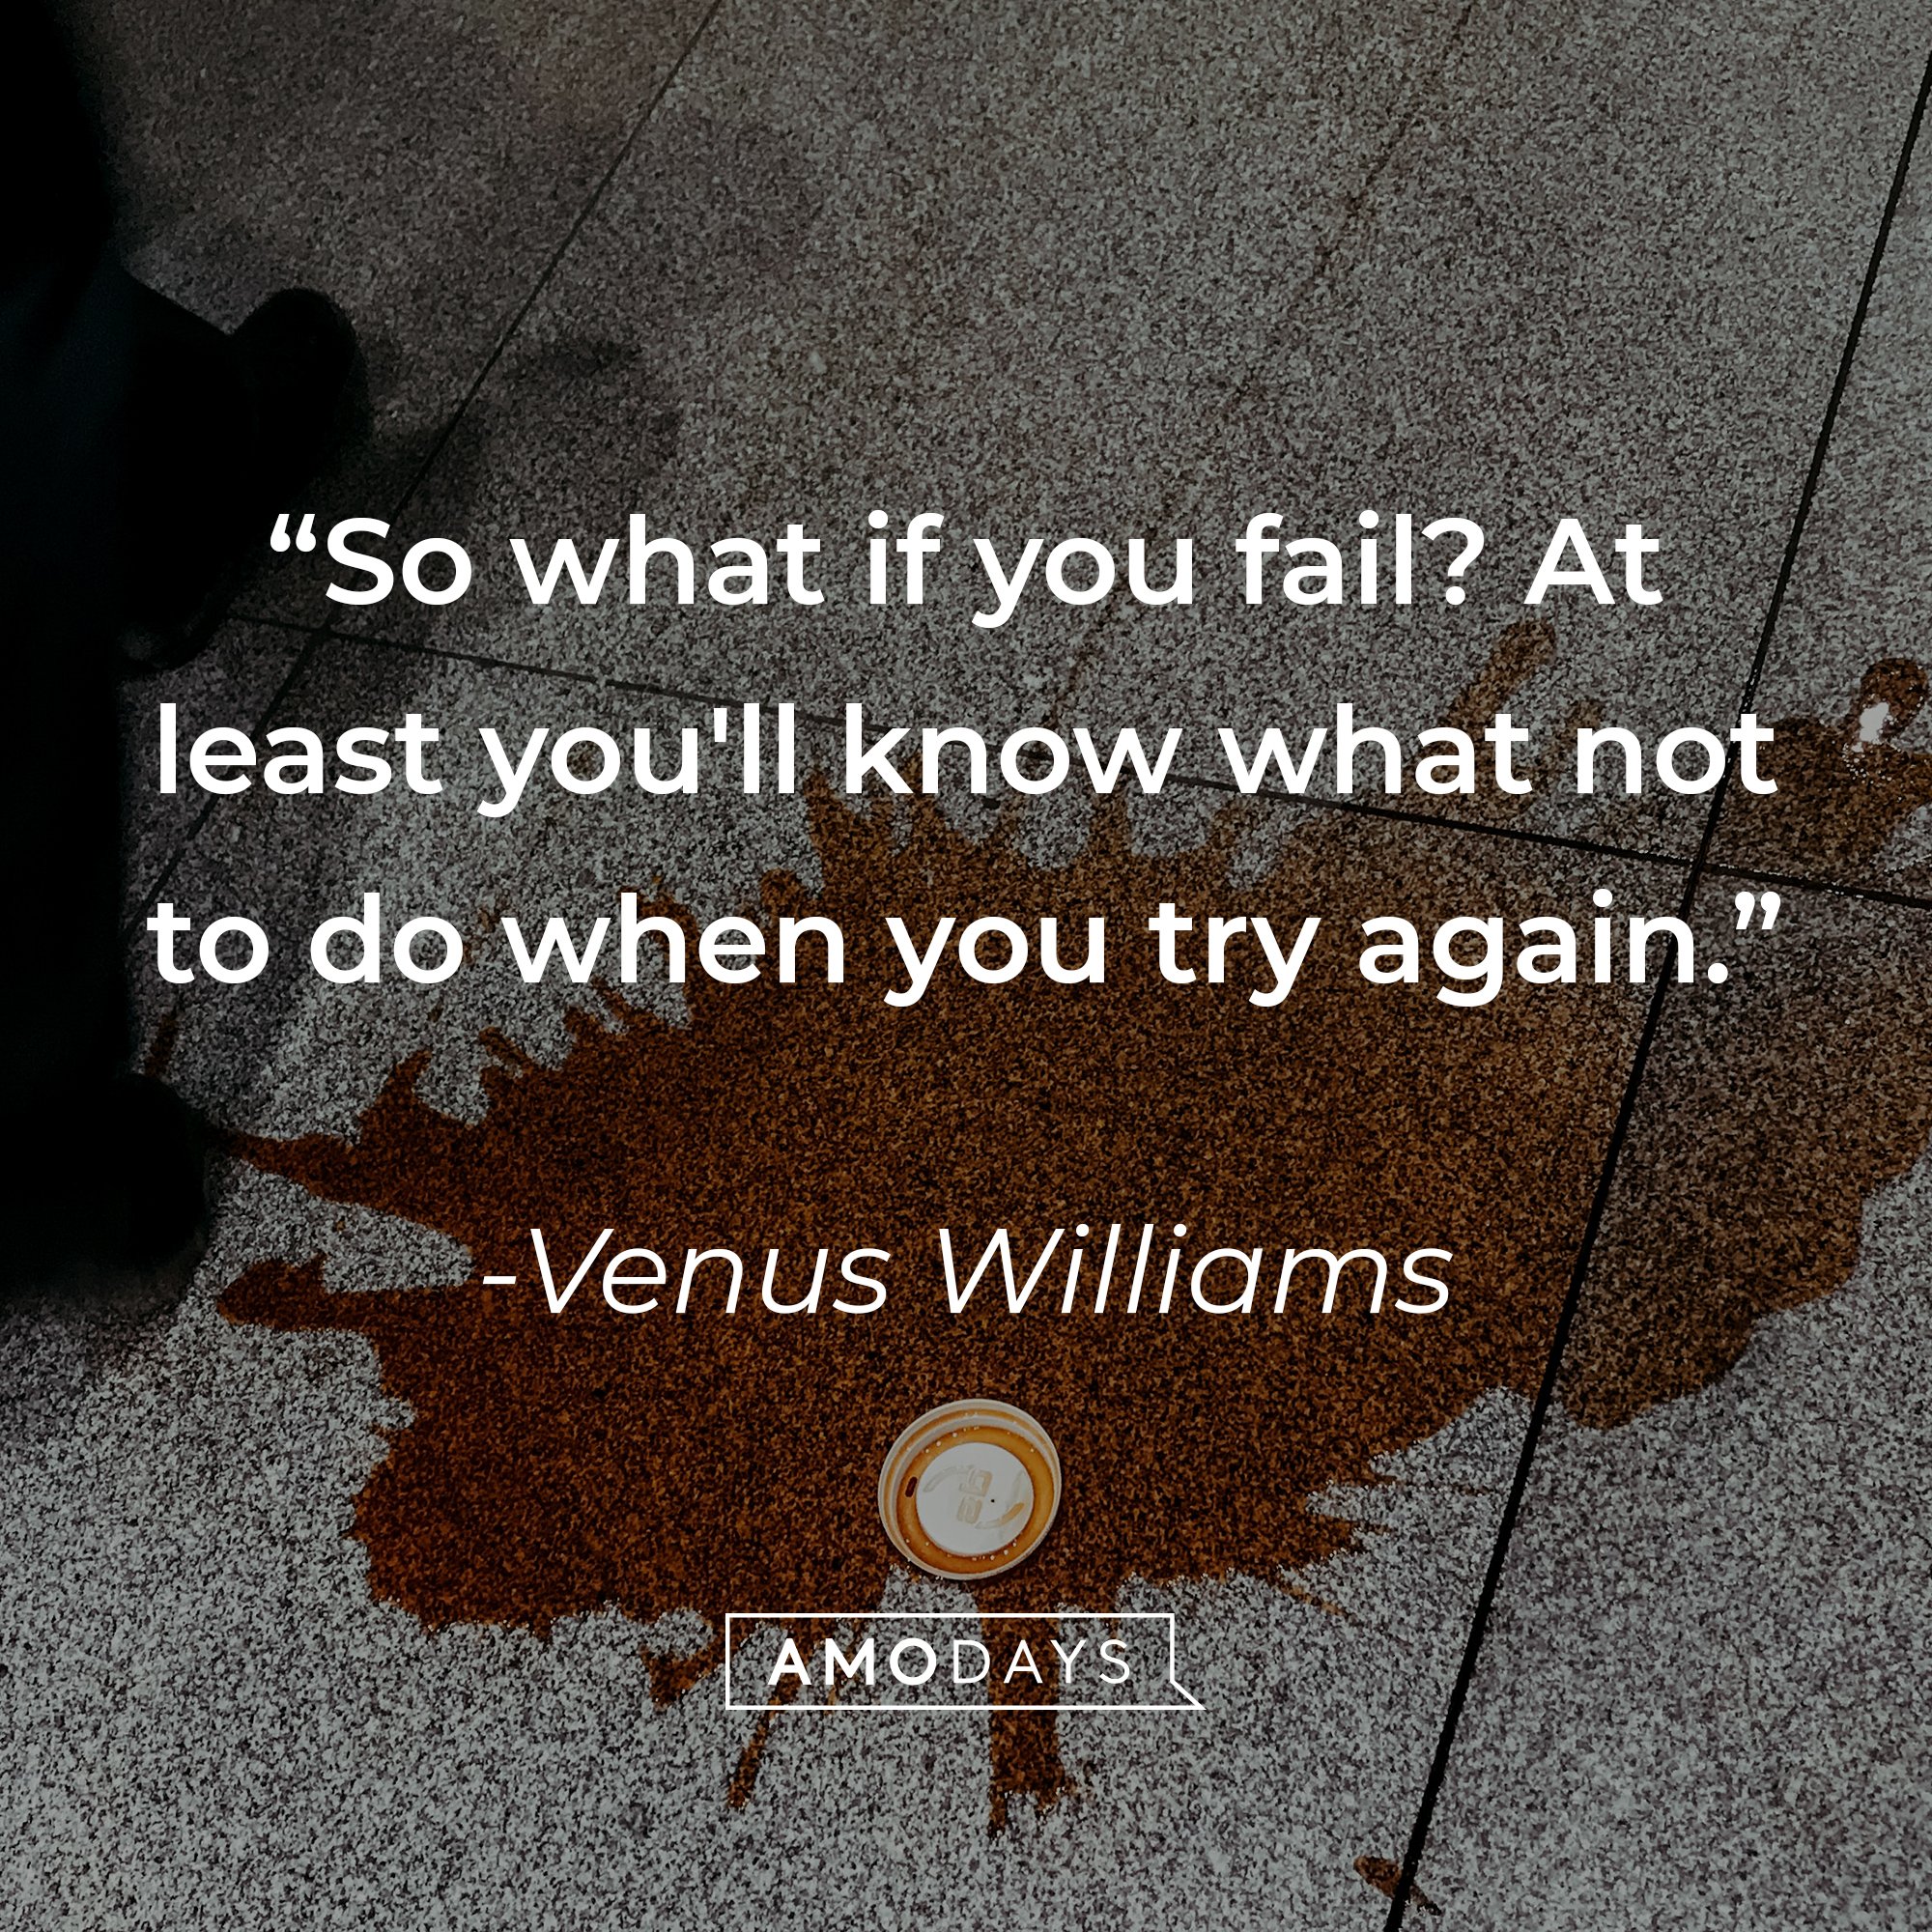 Venus Williams' quote: "So what if you fail? At least you'll know what not to do when you try again." | Image: AmoDays